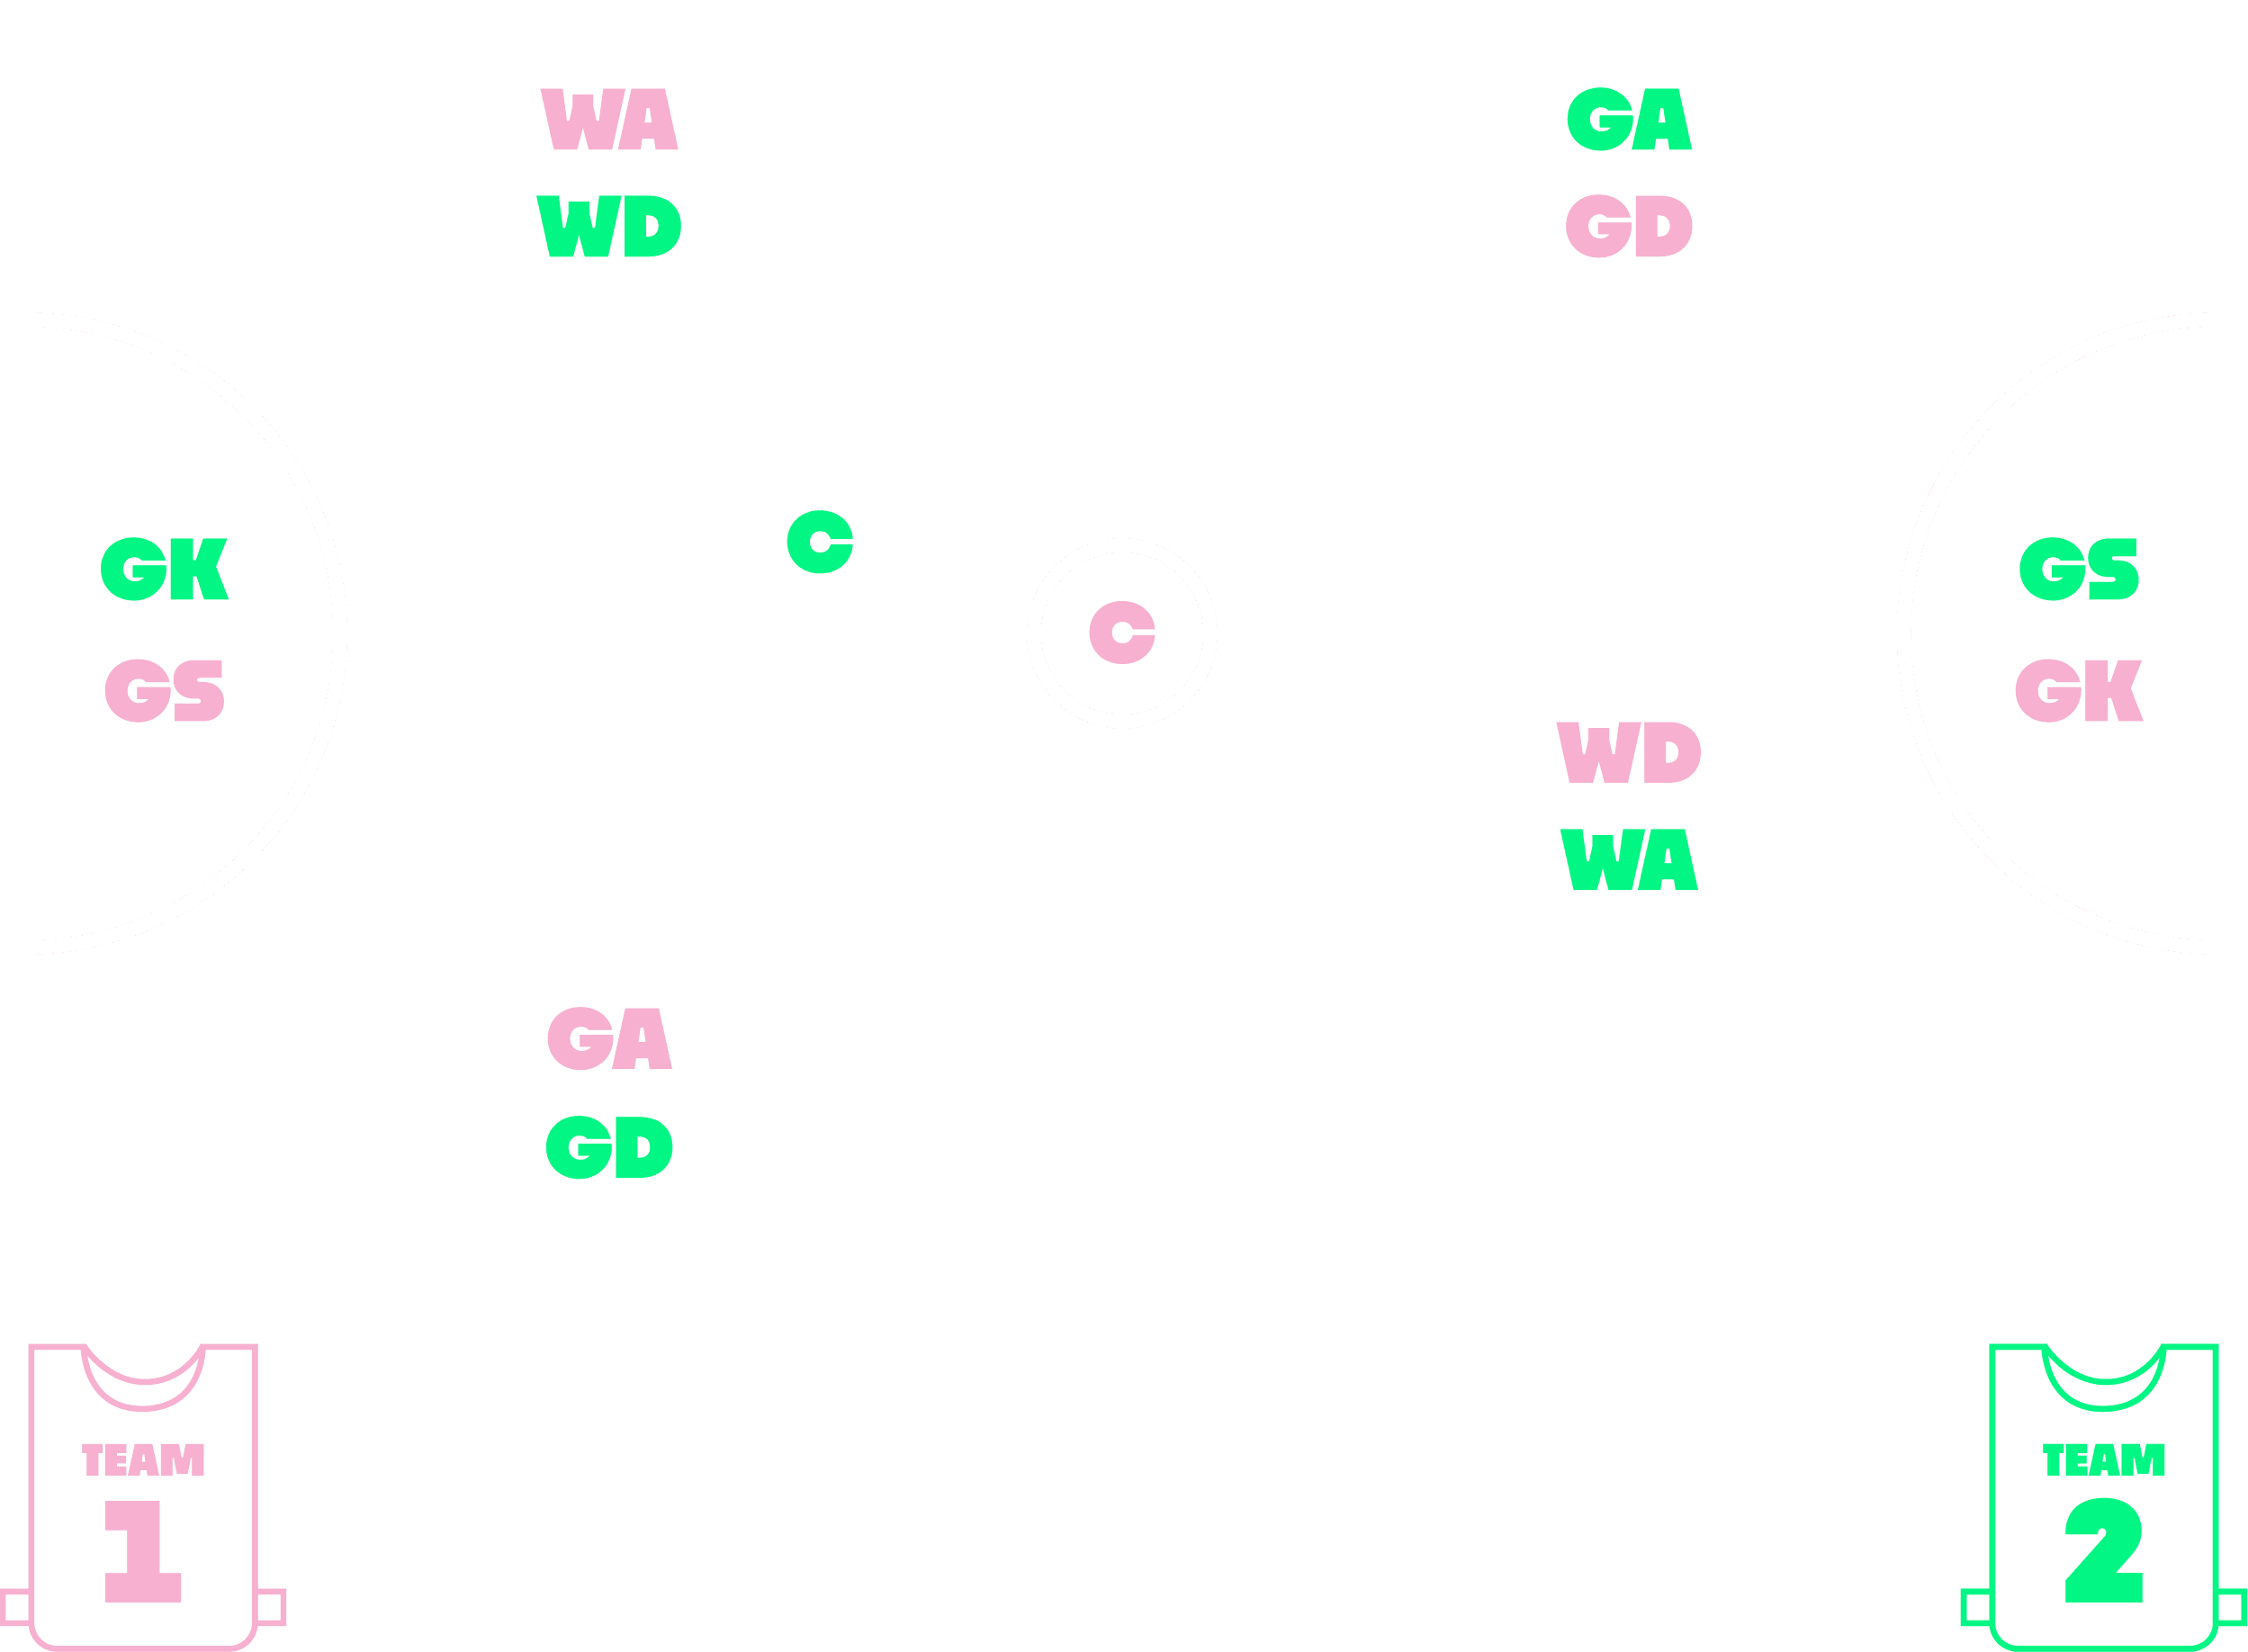 Illustration of a netball court and team positions